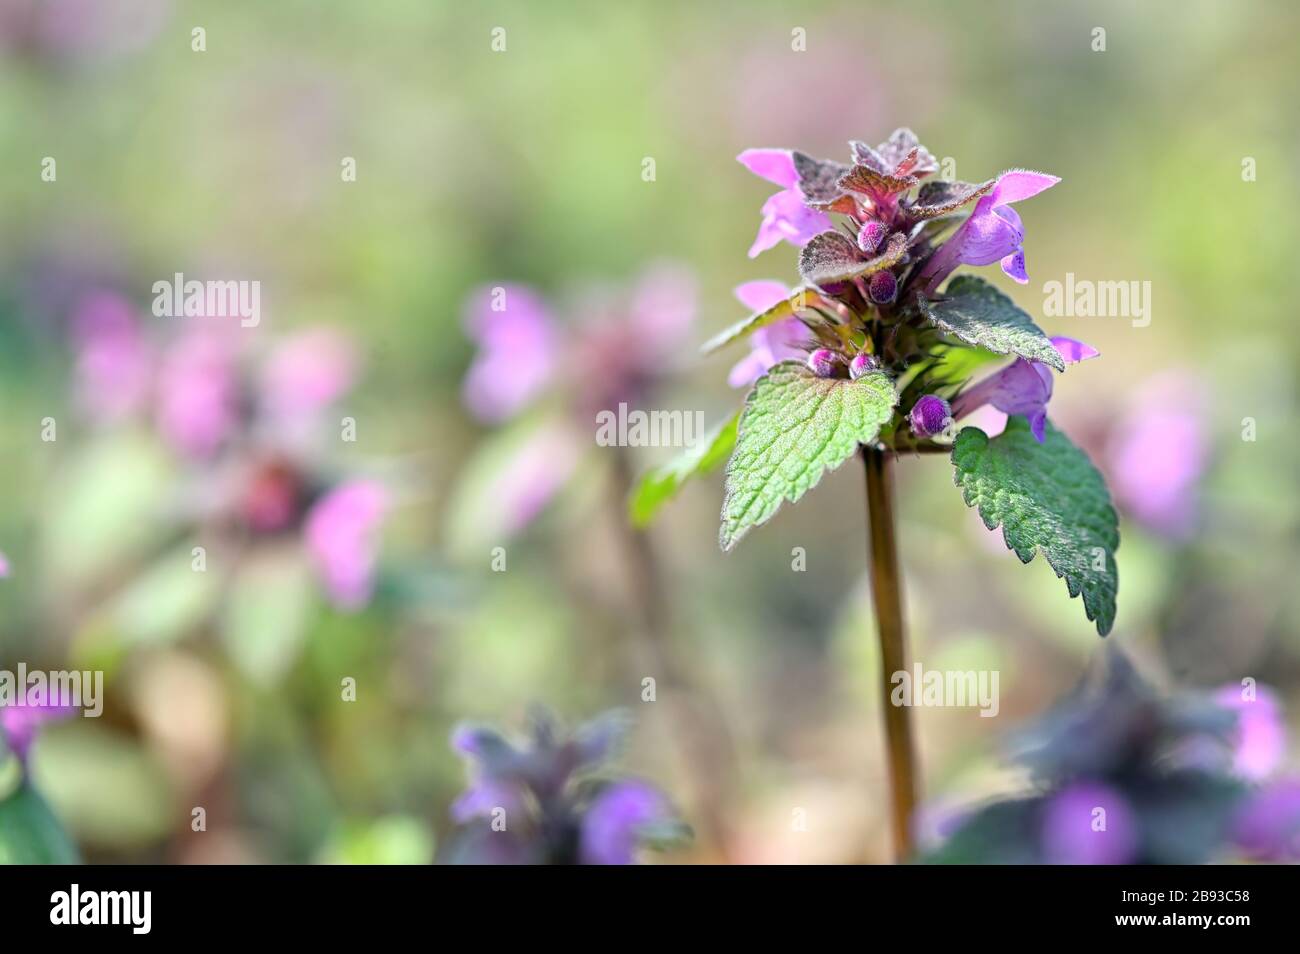 The Spotted Dead-Nettle Lamium Maculatum Blooming In Spring Stock Photo